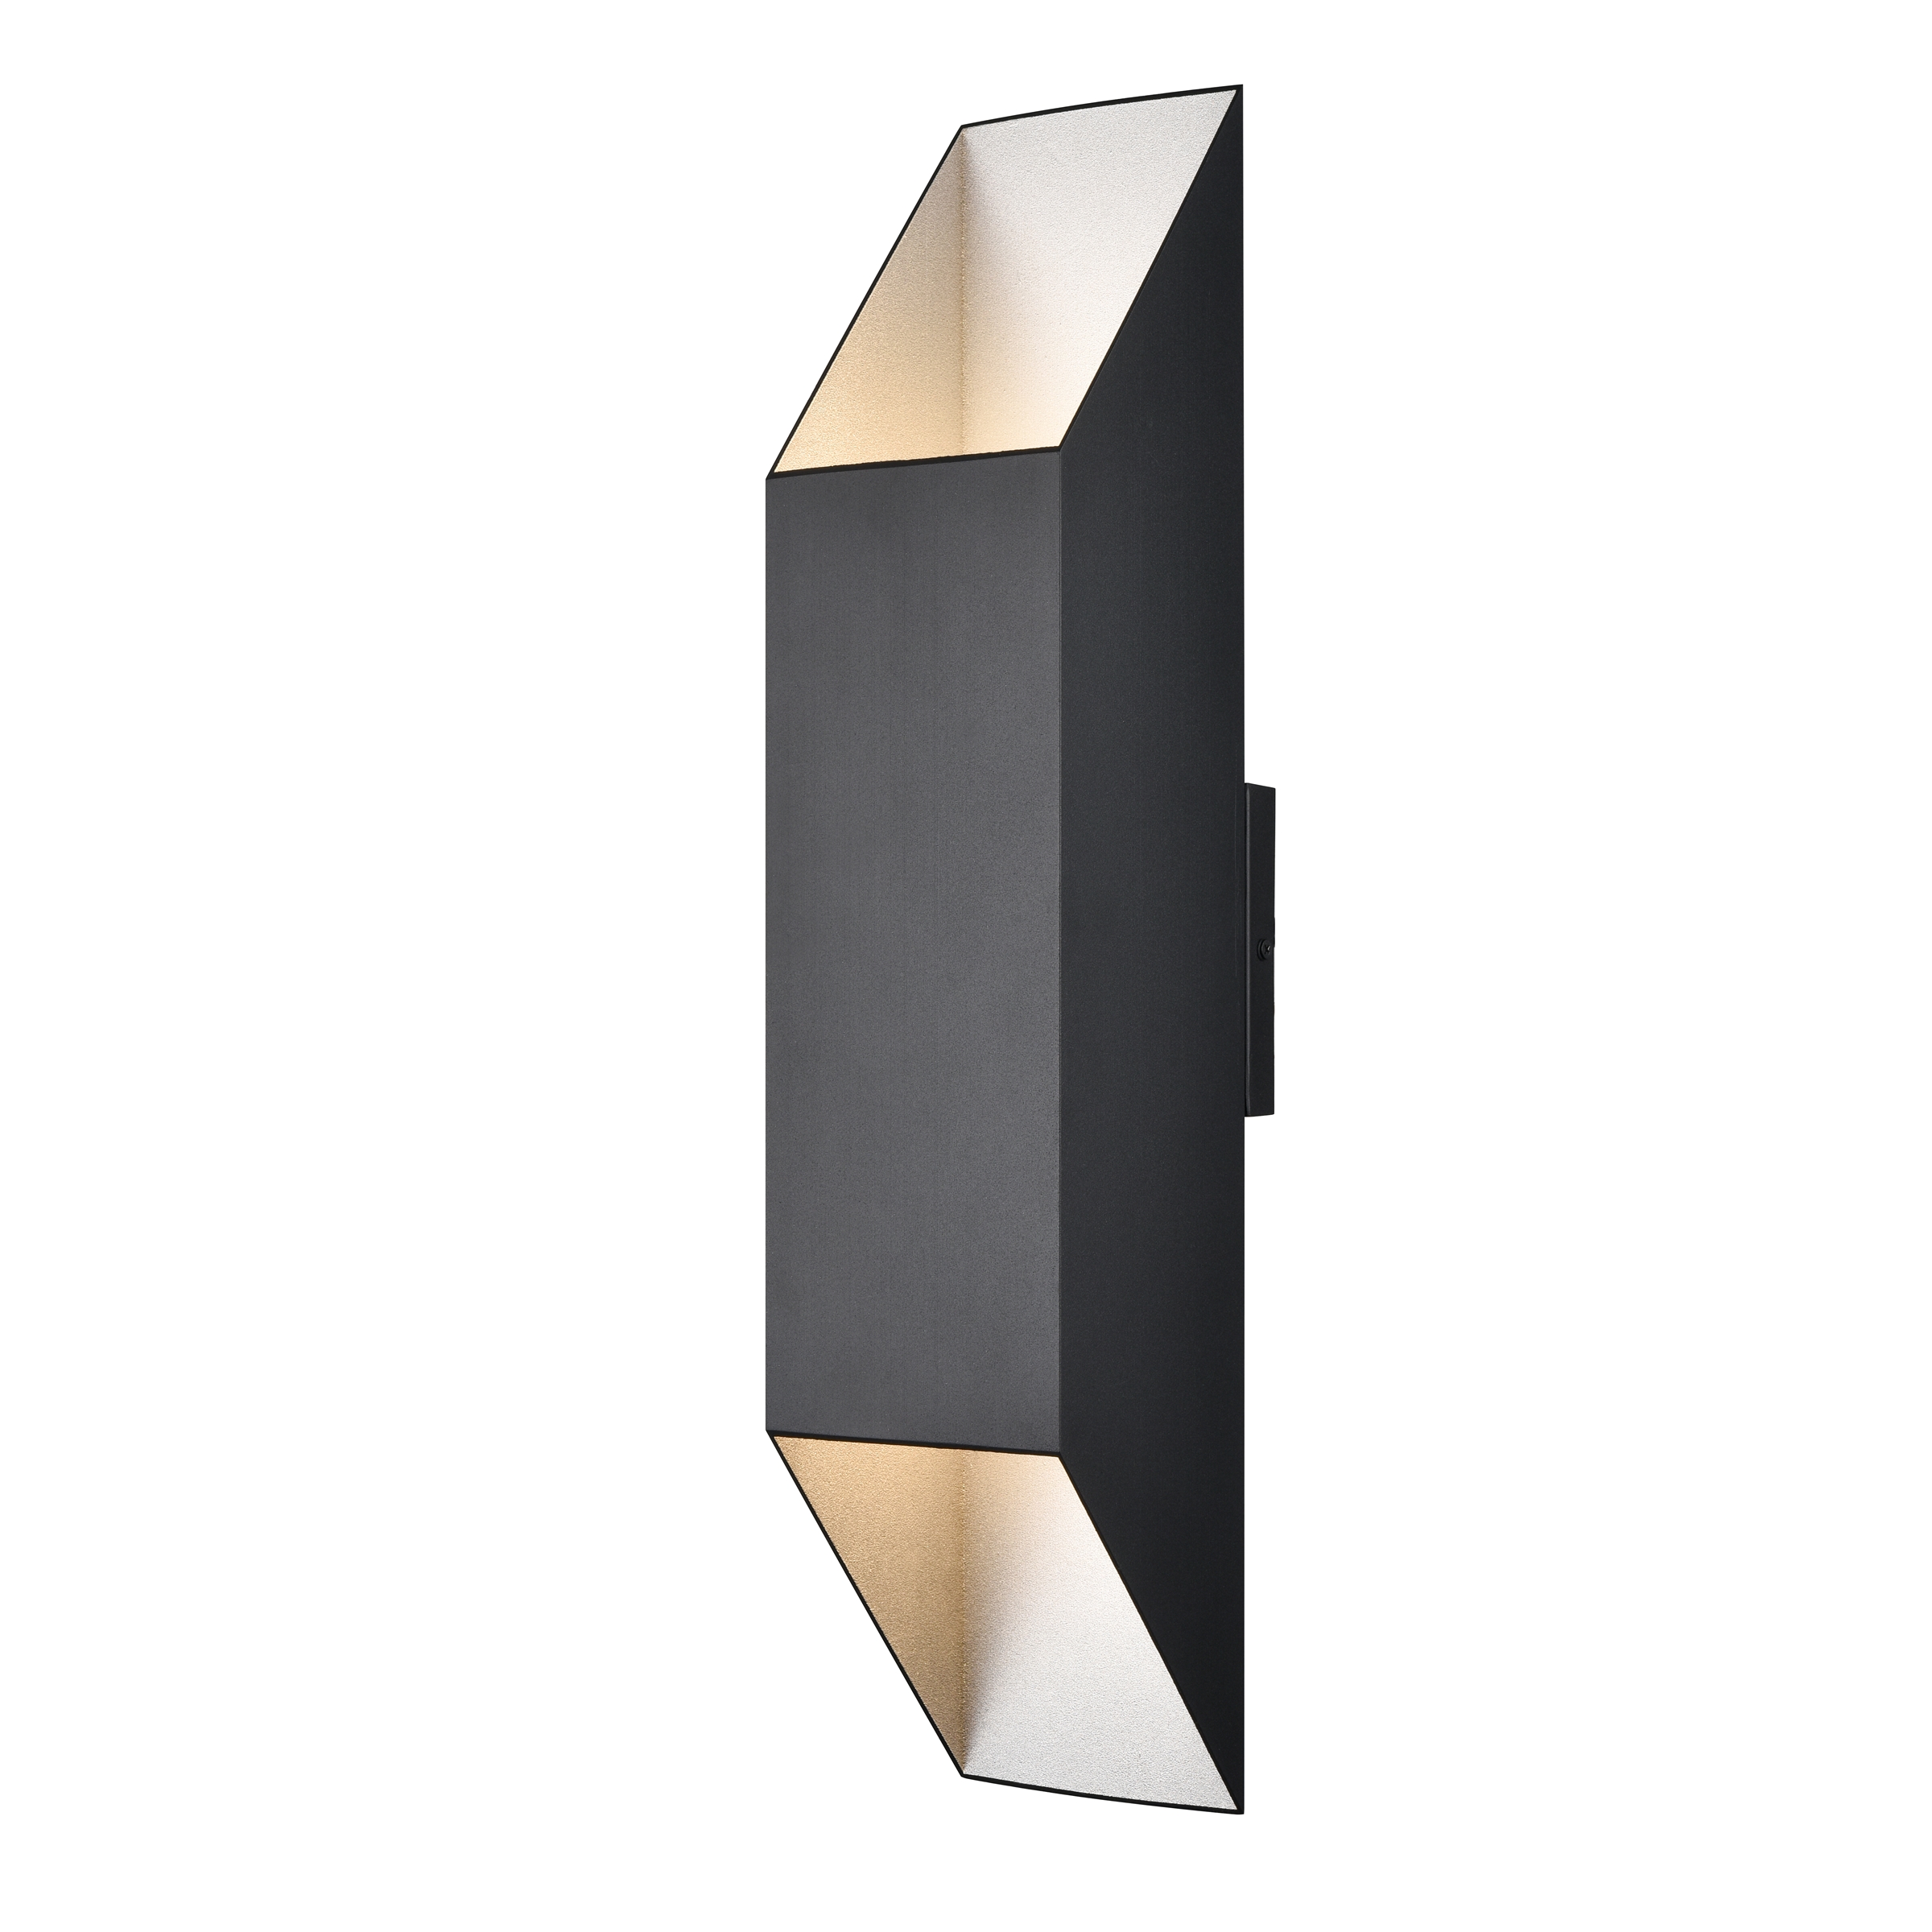 Brecon Outdoor Square 24" 2 Light Sconce